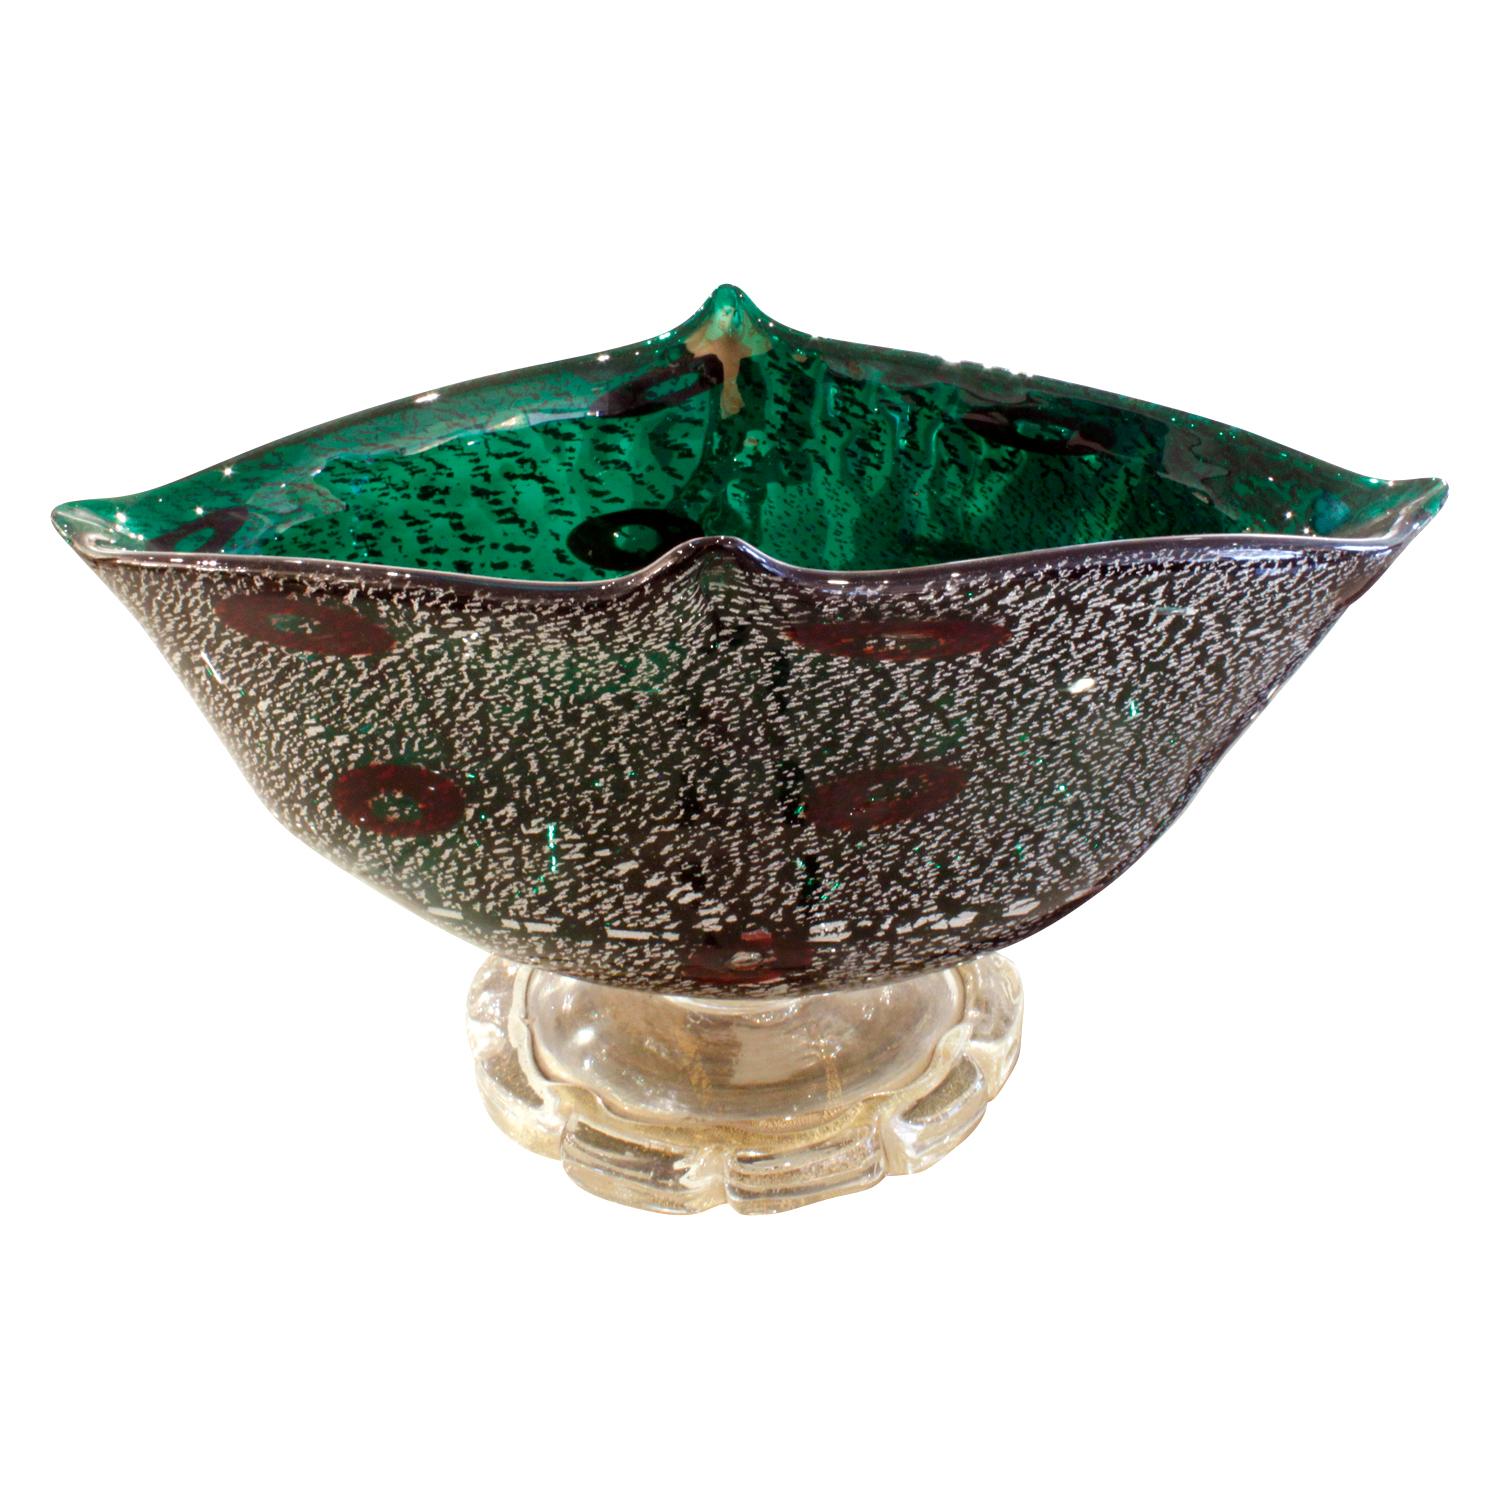 Footed vessel with base in hand blown clear glass with gold foil and body in green glass with silver foil and murrhines by Giulio Radi for Arte Vetraria Muranese (A.V.E.M.), Murano Italy, 1940s.